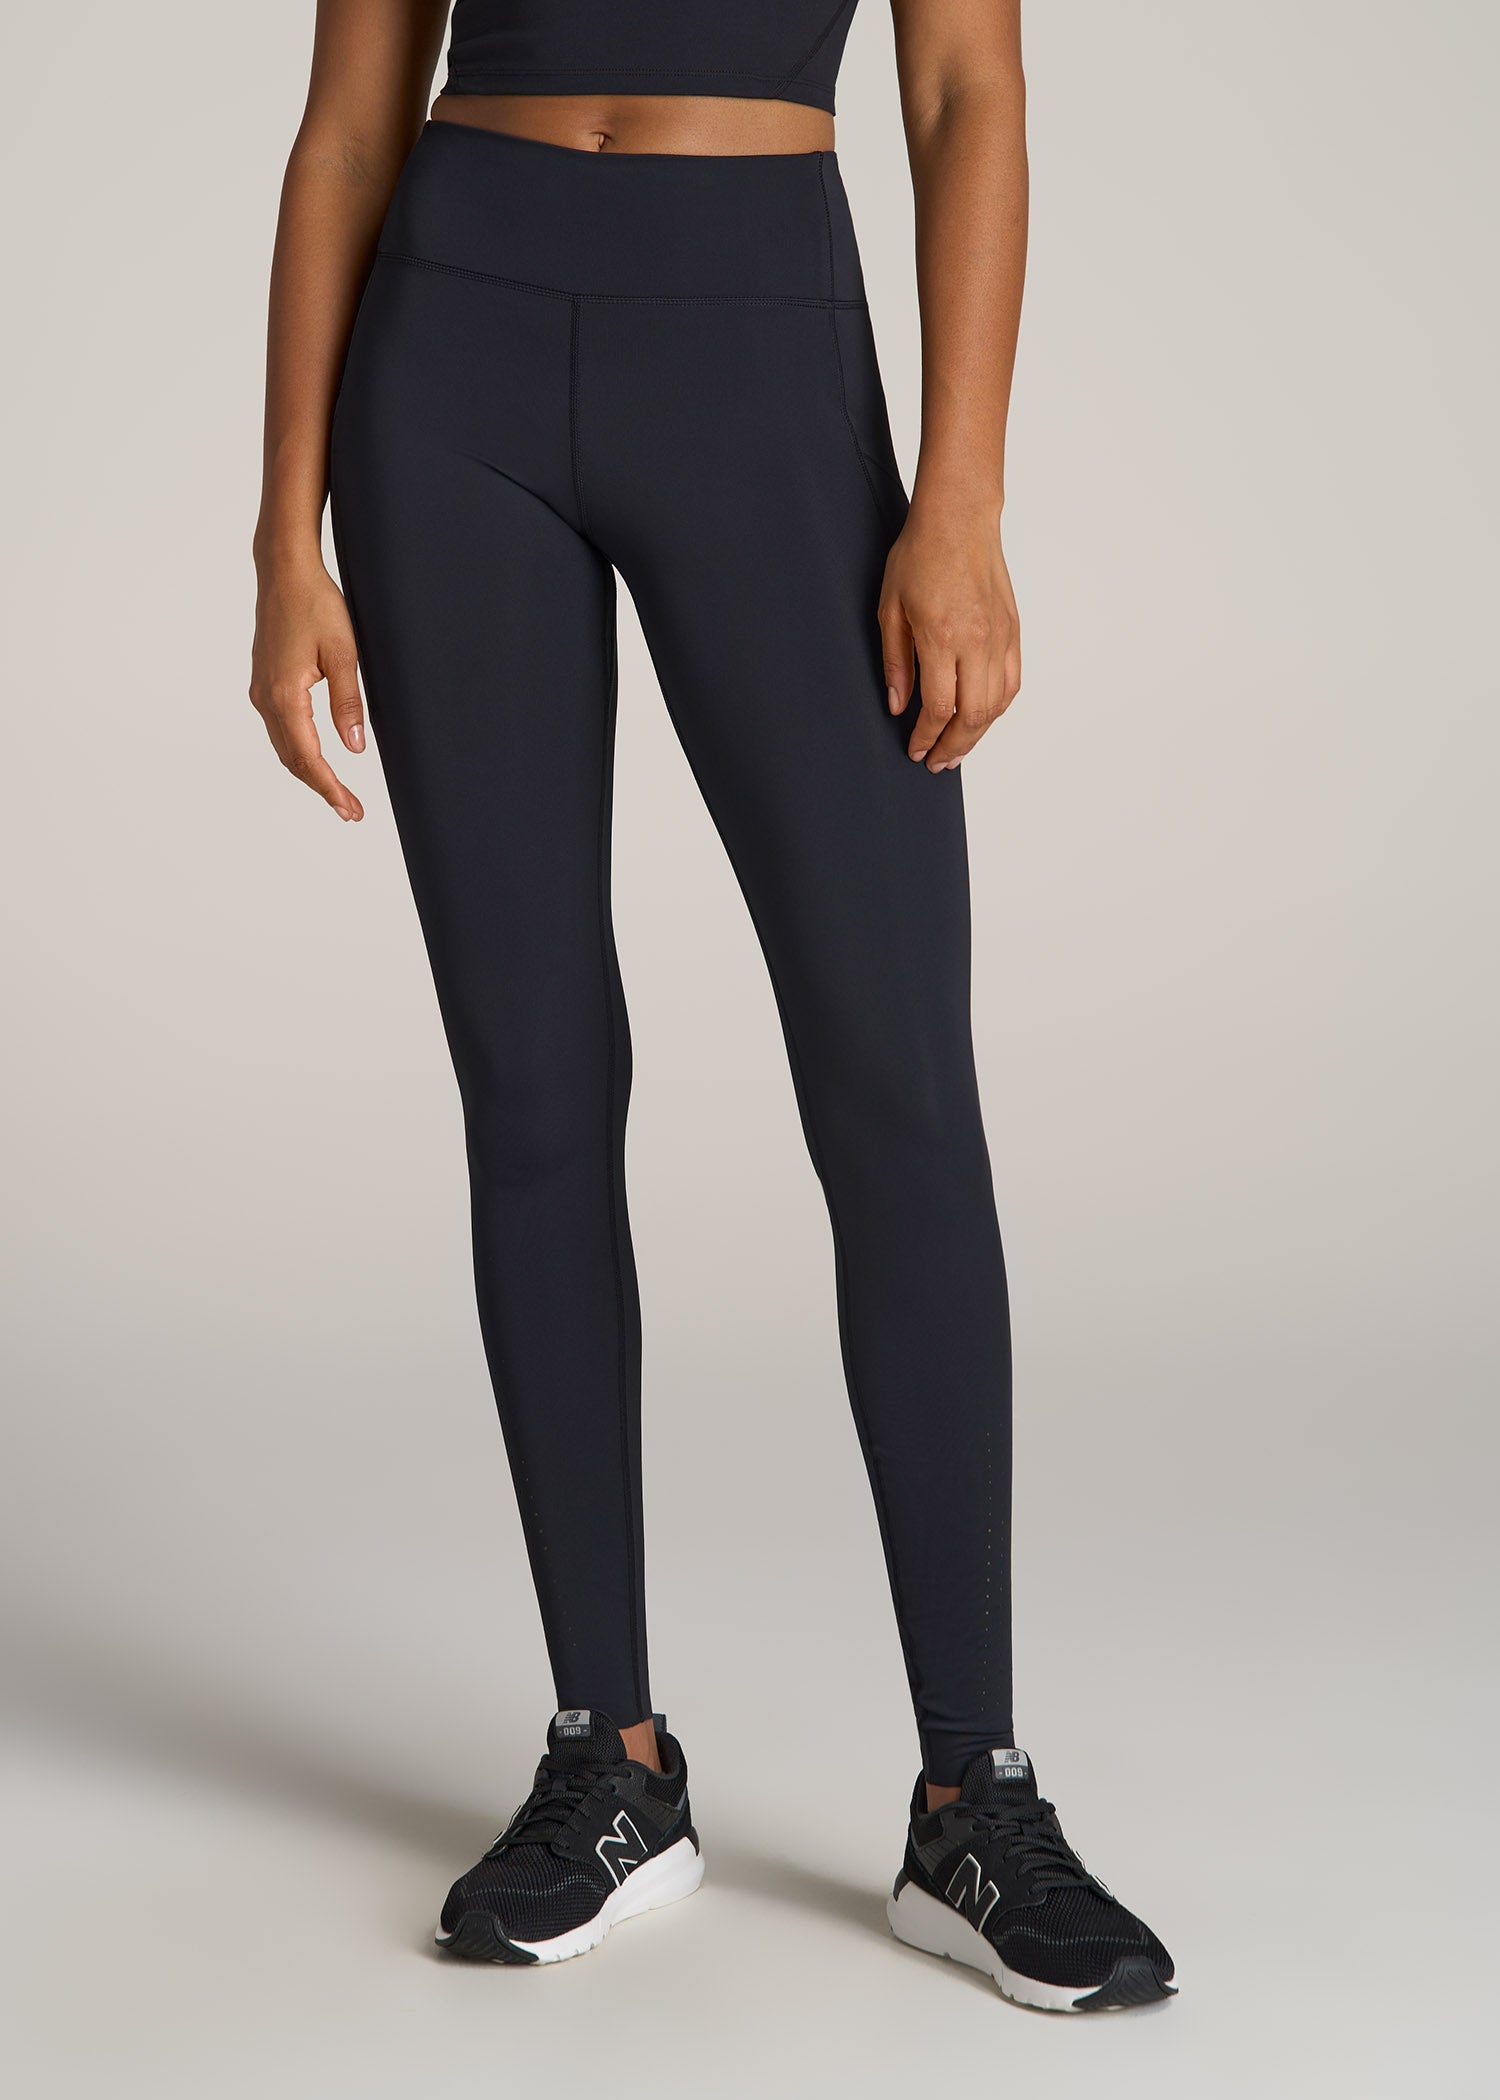 Women's Leggings, Mid Rise to High Rise, Classic Style